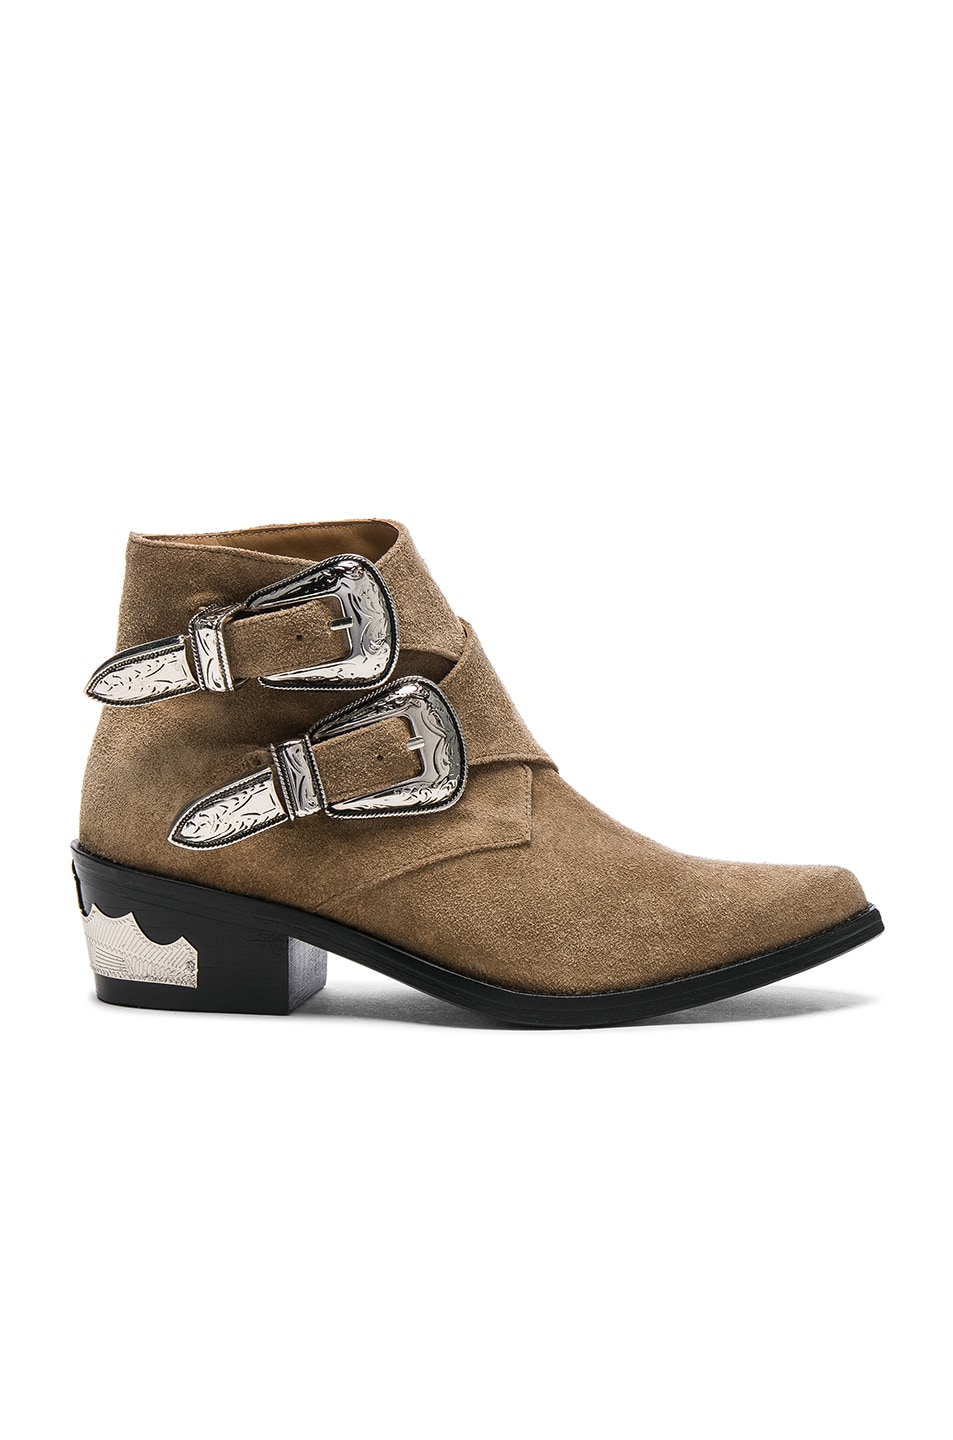 Image 1 of TOGA PULLA Buckle Suede Booties in Khaki Suede